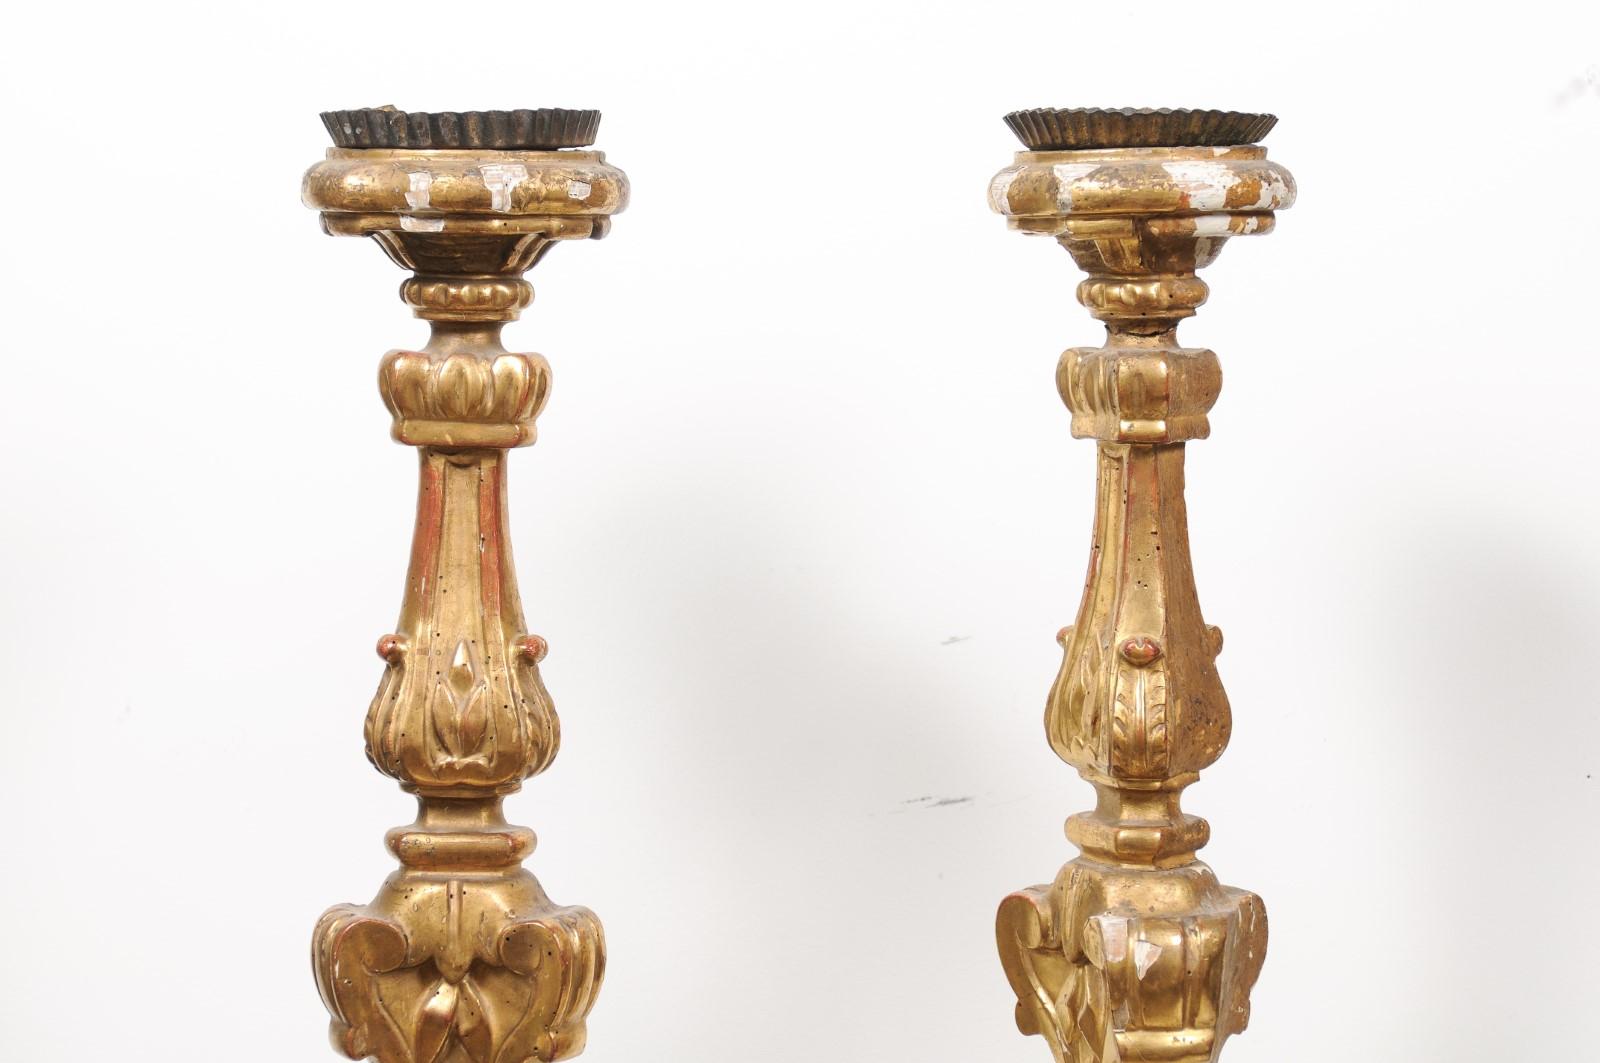 Pair of French 19th Century Gilt Candlesticks with Carved Foliage and Volutes For Sale 9